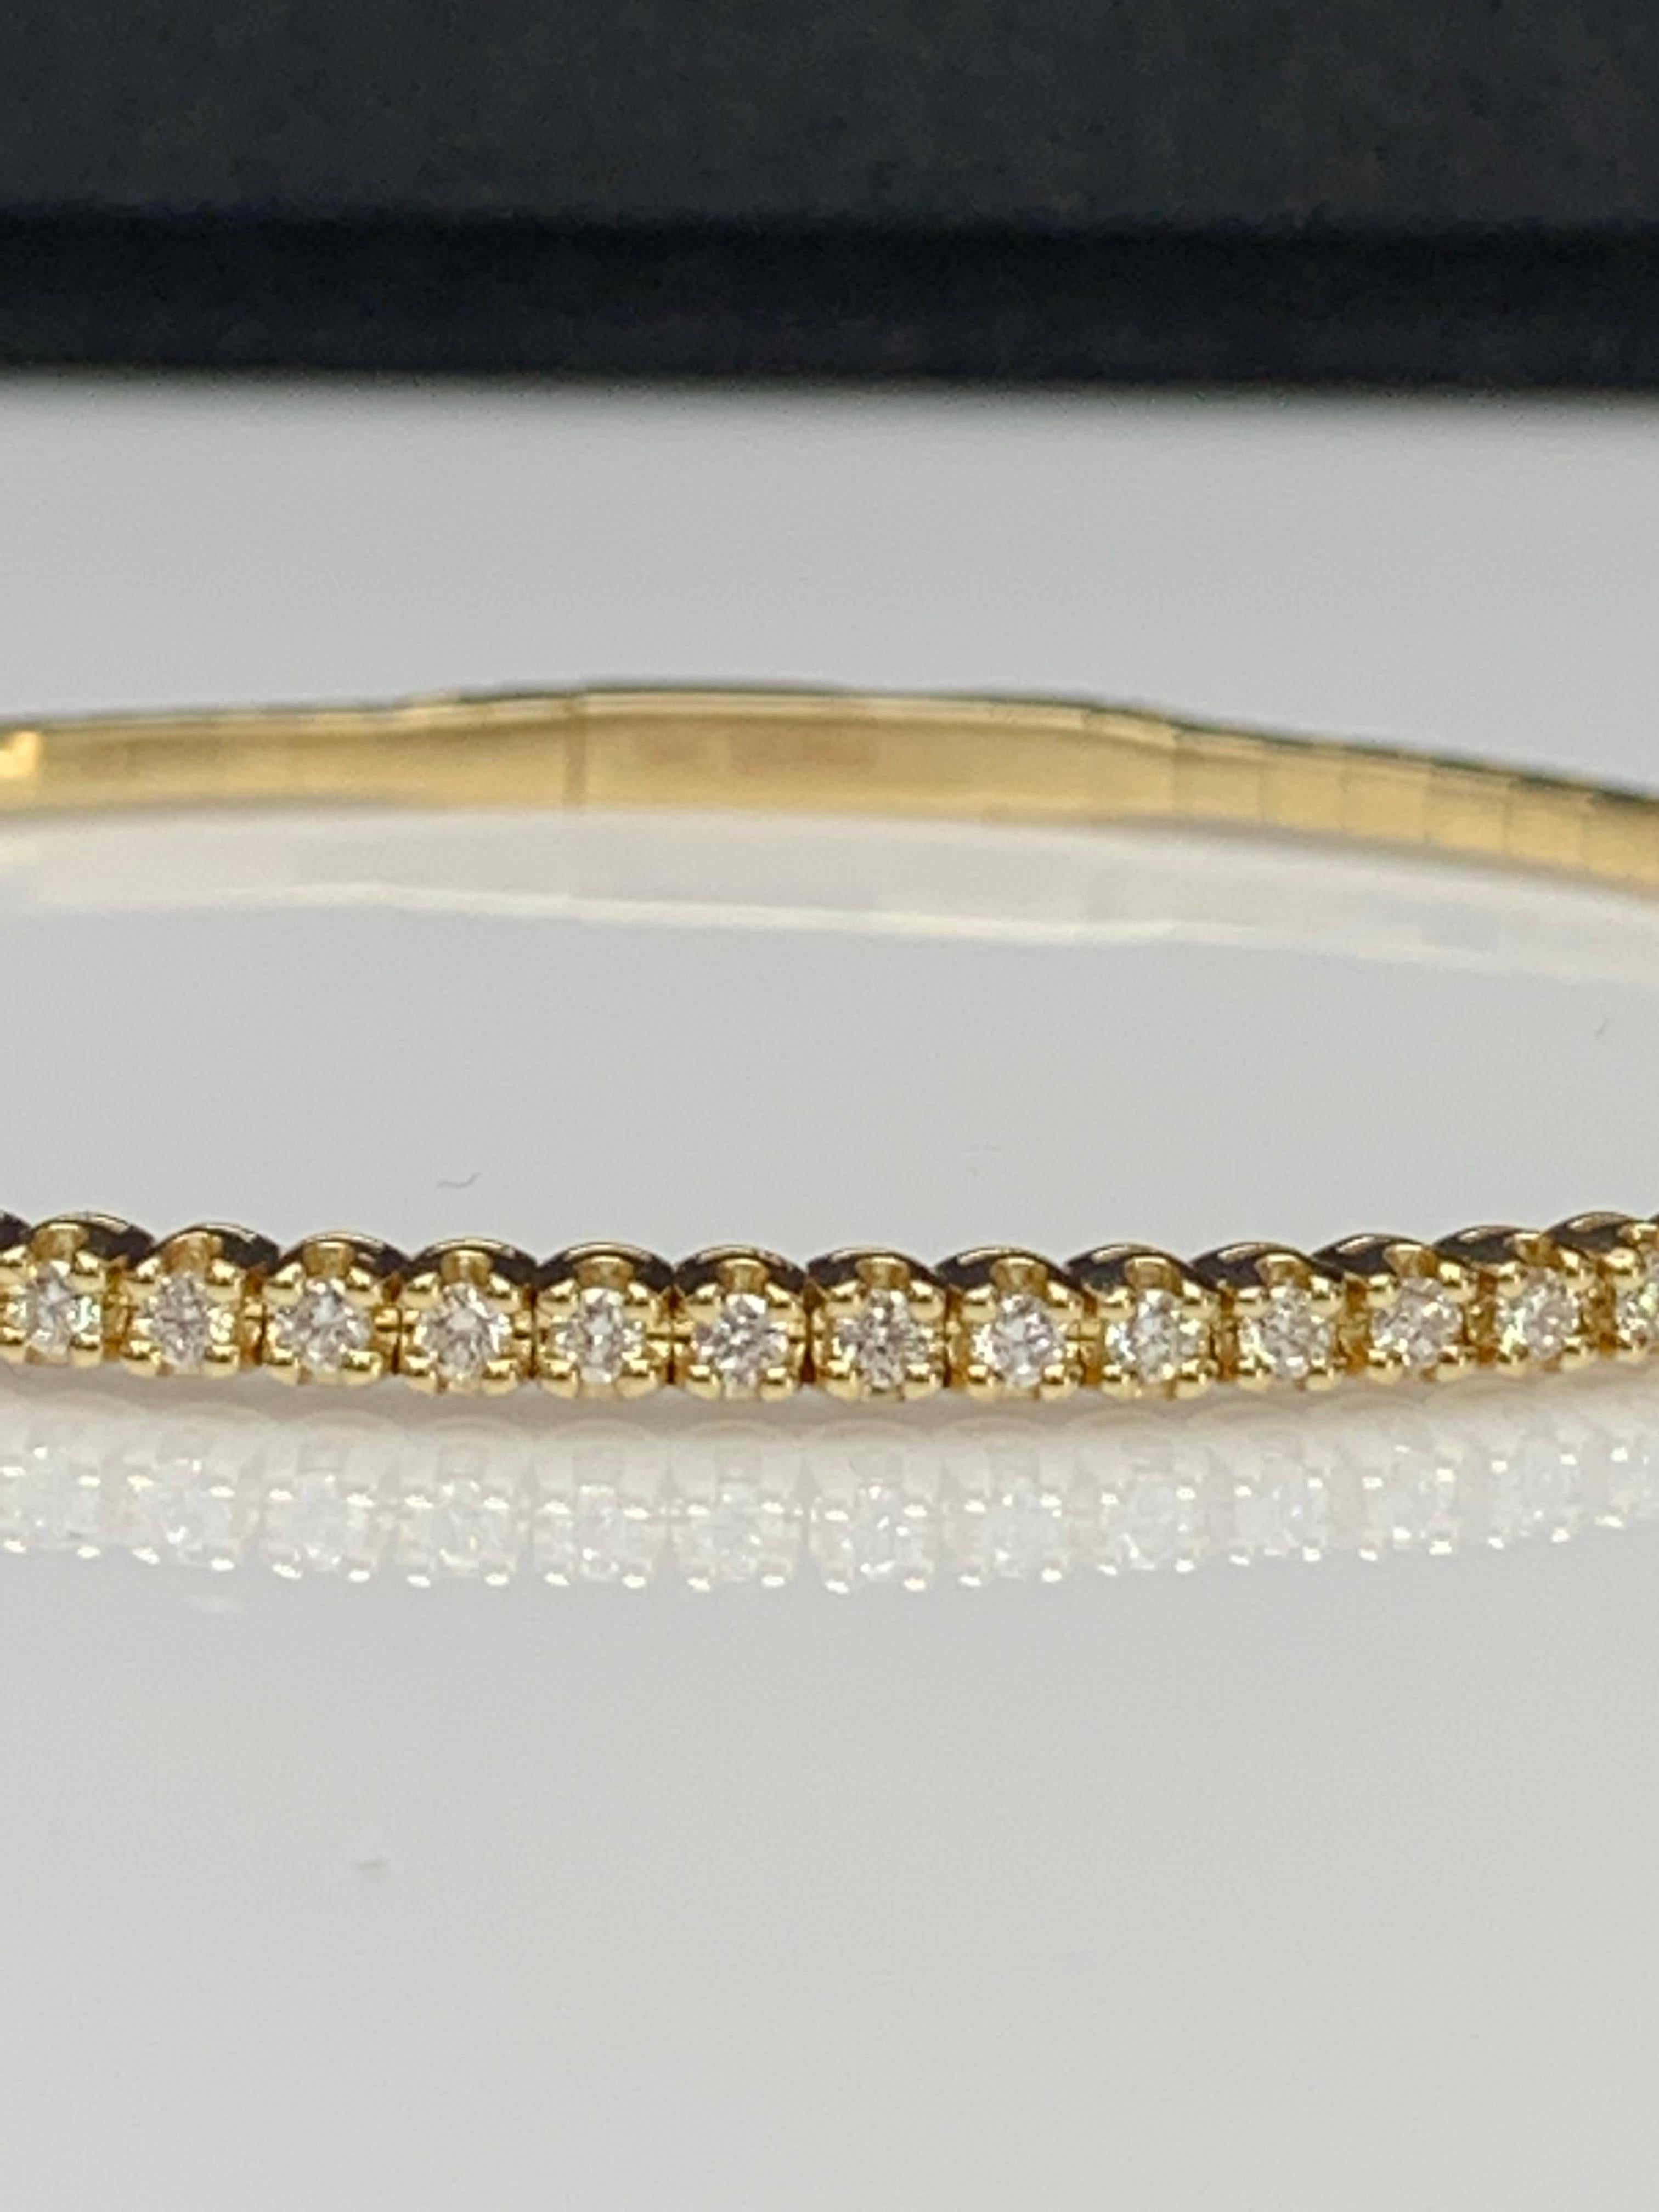 A simple but elegant bangle bracelet set with 33 brilliant round cut diamonds weighing 0.66 carats total. Has a clasp to slip and wear the bangle securely. Made in 14k yellow gold.

Style available in different price ranges. Prices are based on your